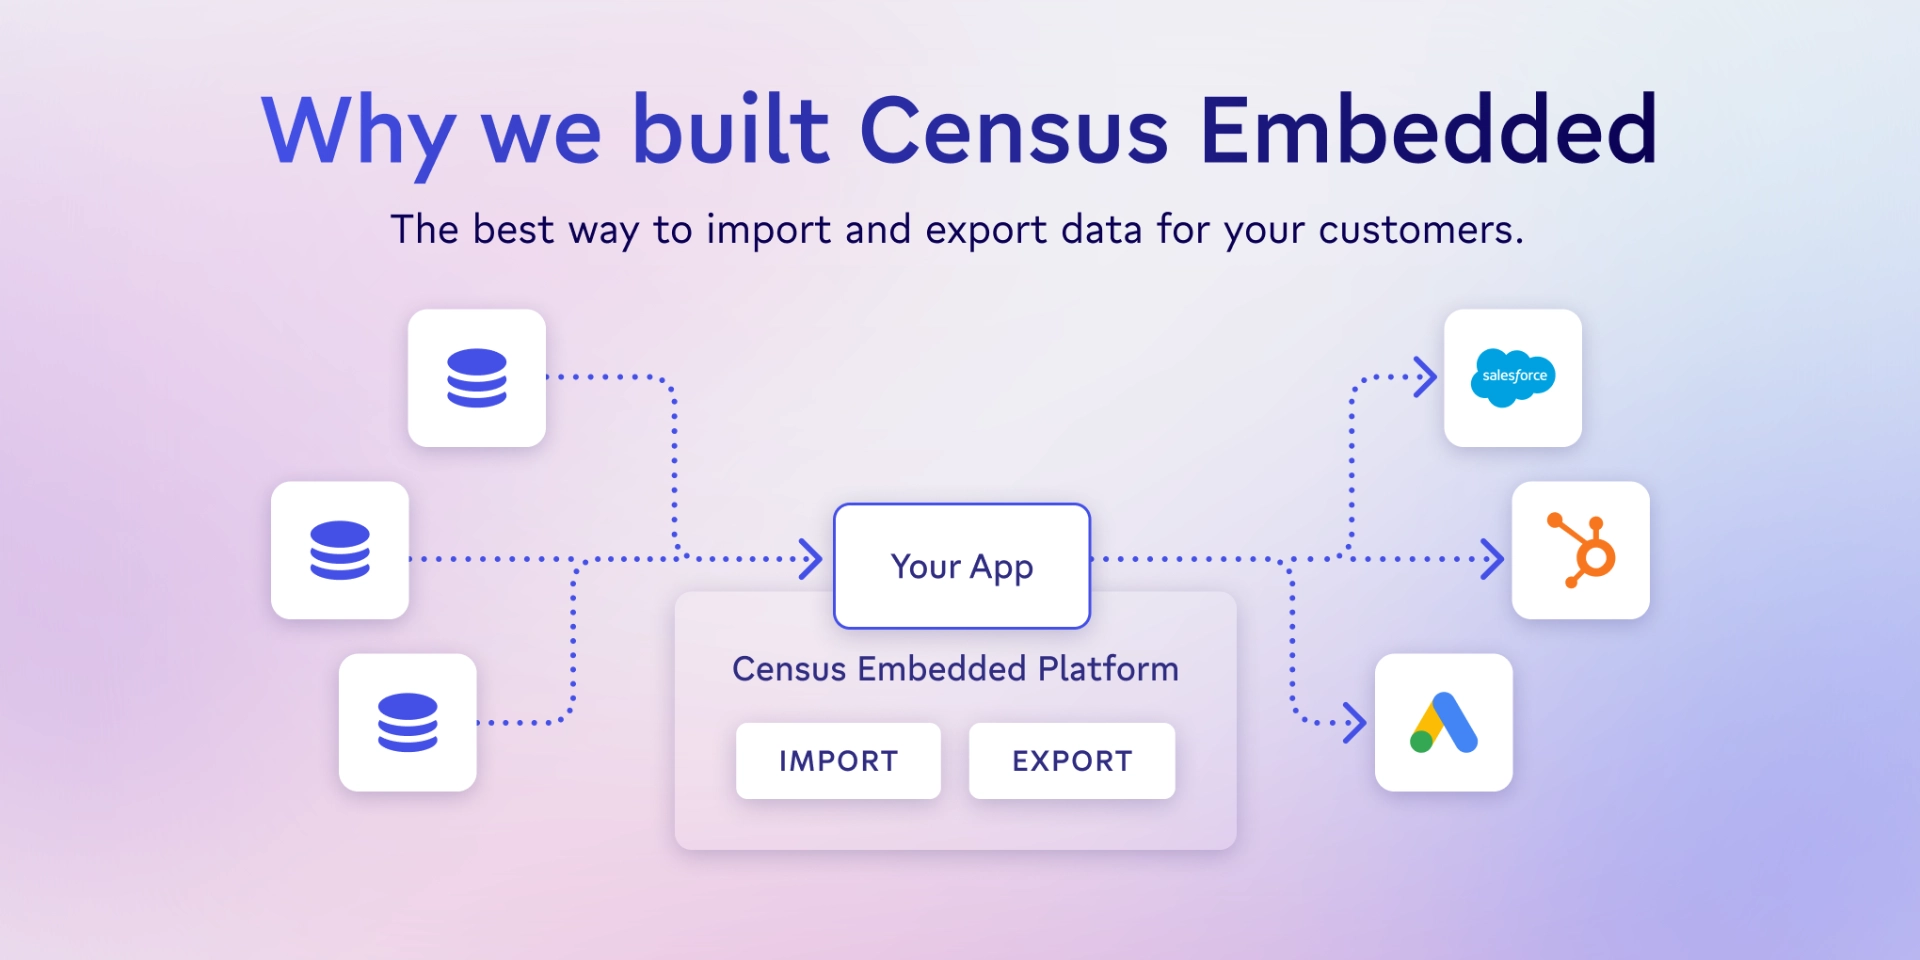 Why Census Embedded?